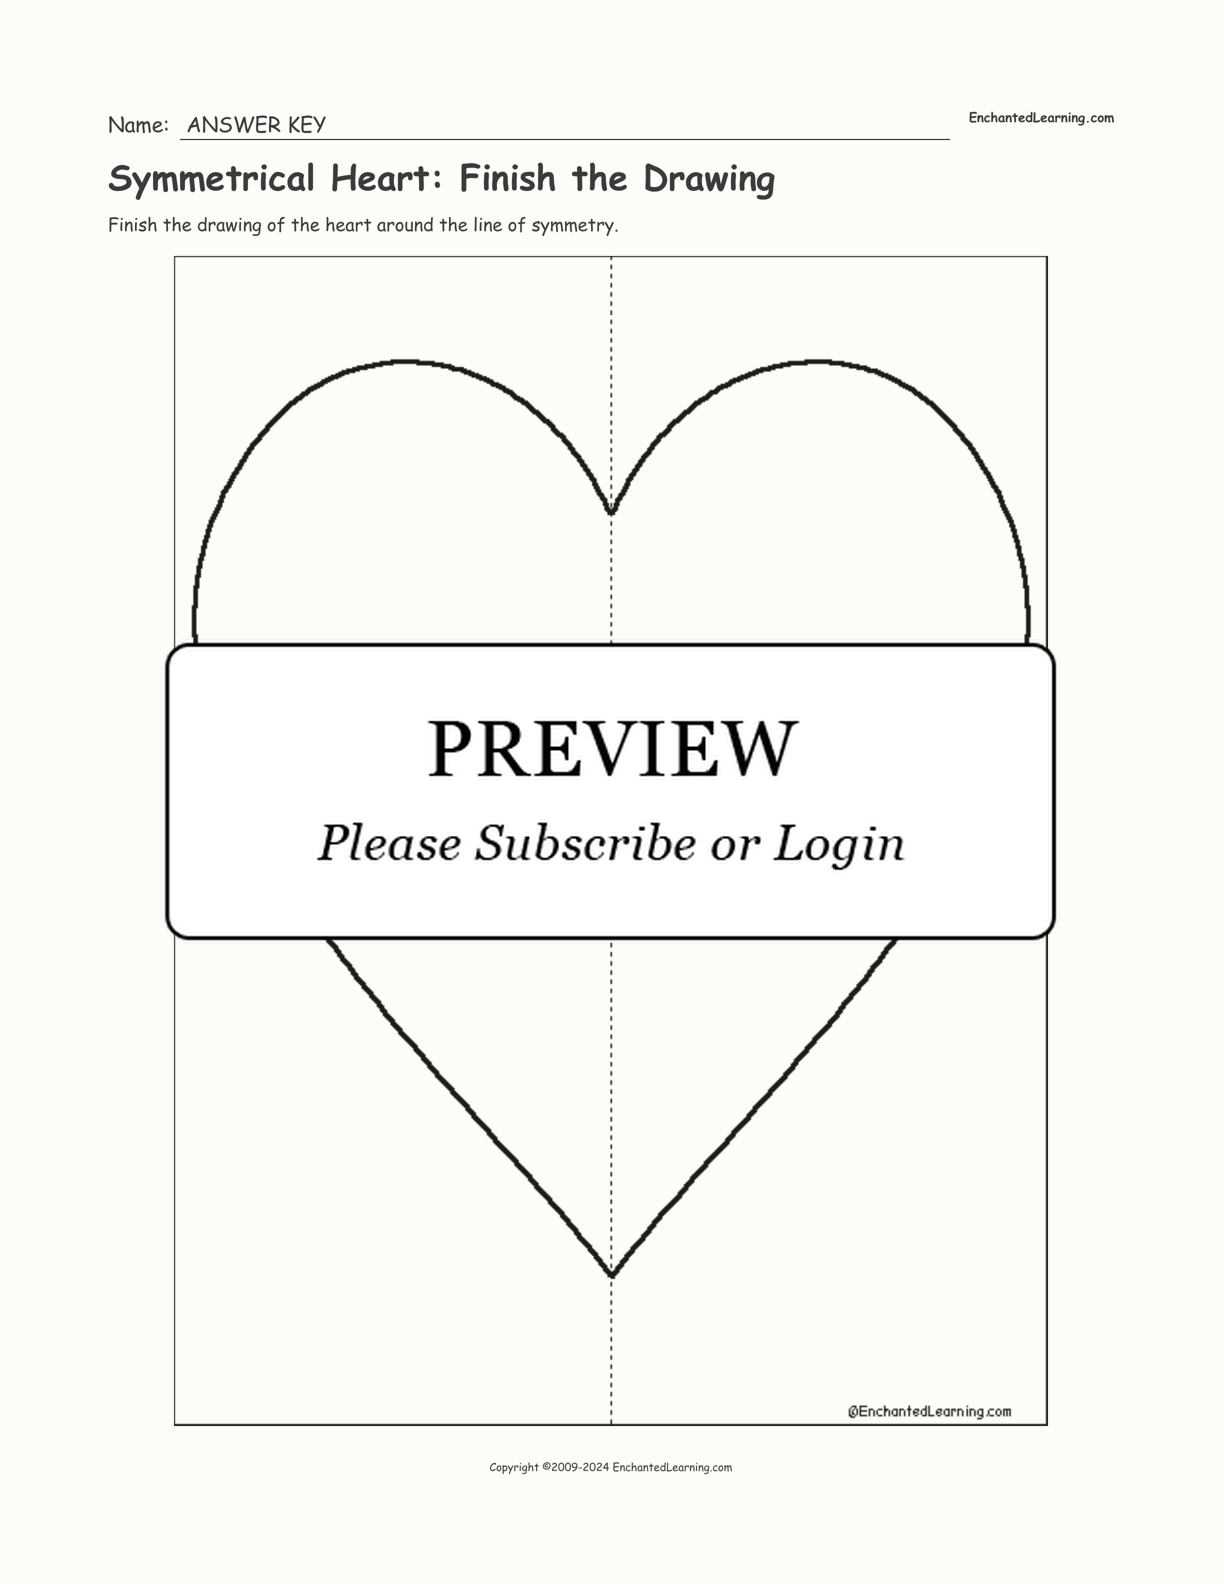 Symmetrical Heart: Finish the Drawing interactive worksheet page 2